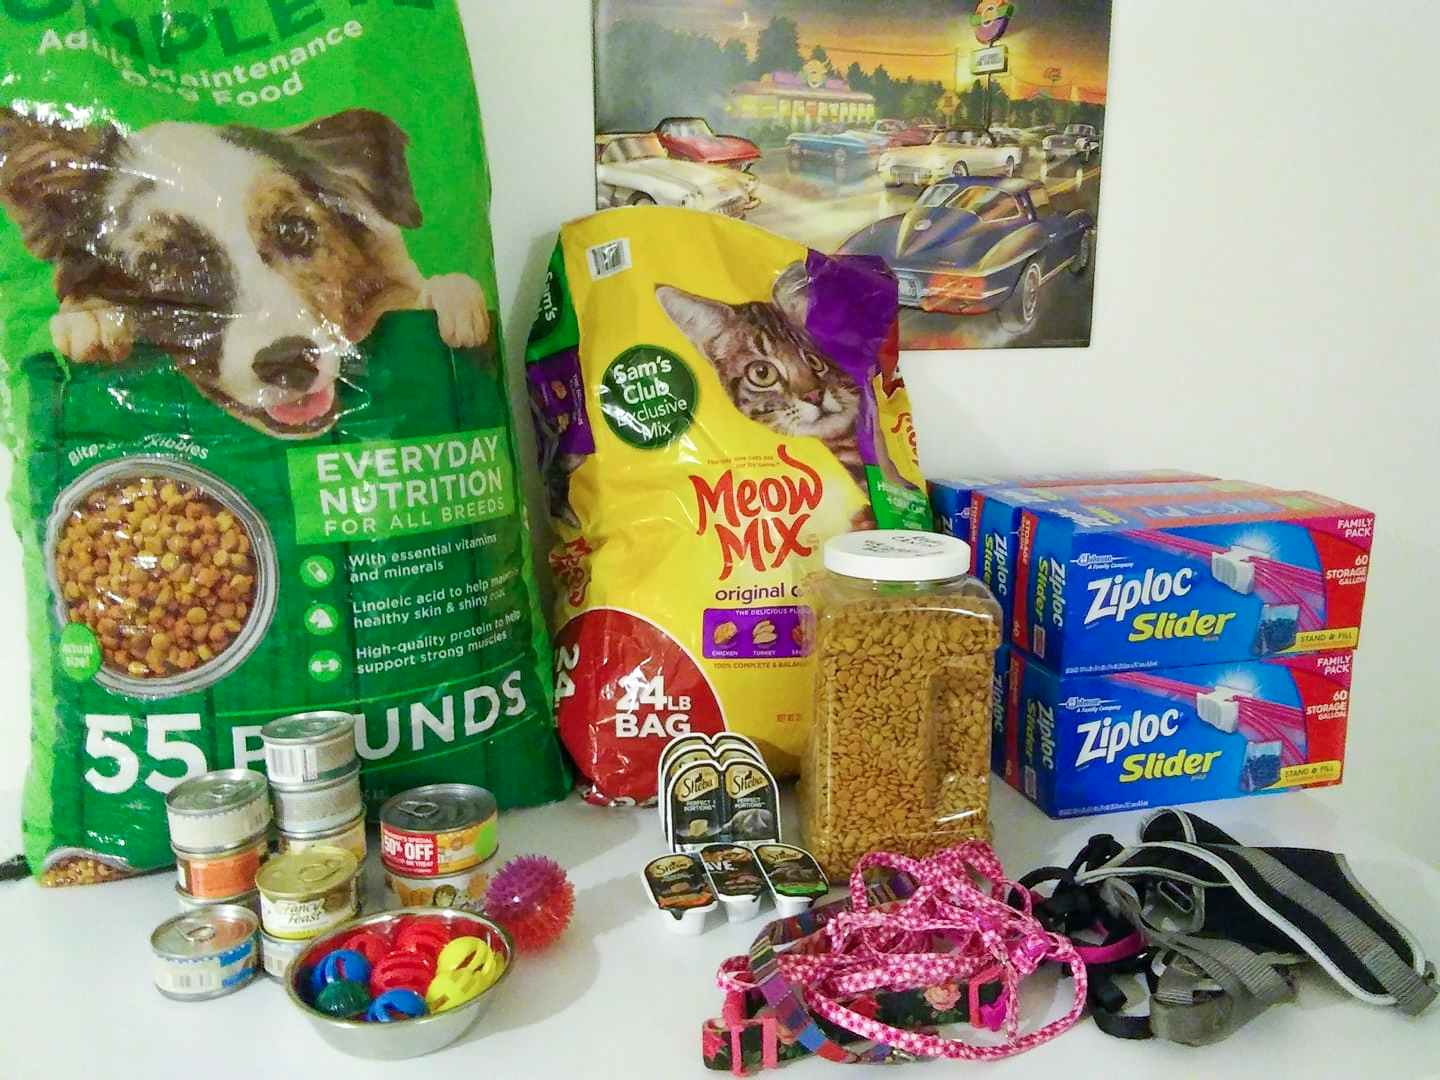 A table with pet supply donations including dog and cat food, toys, leashes, and plastic bags.